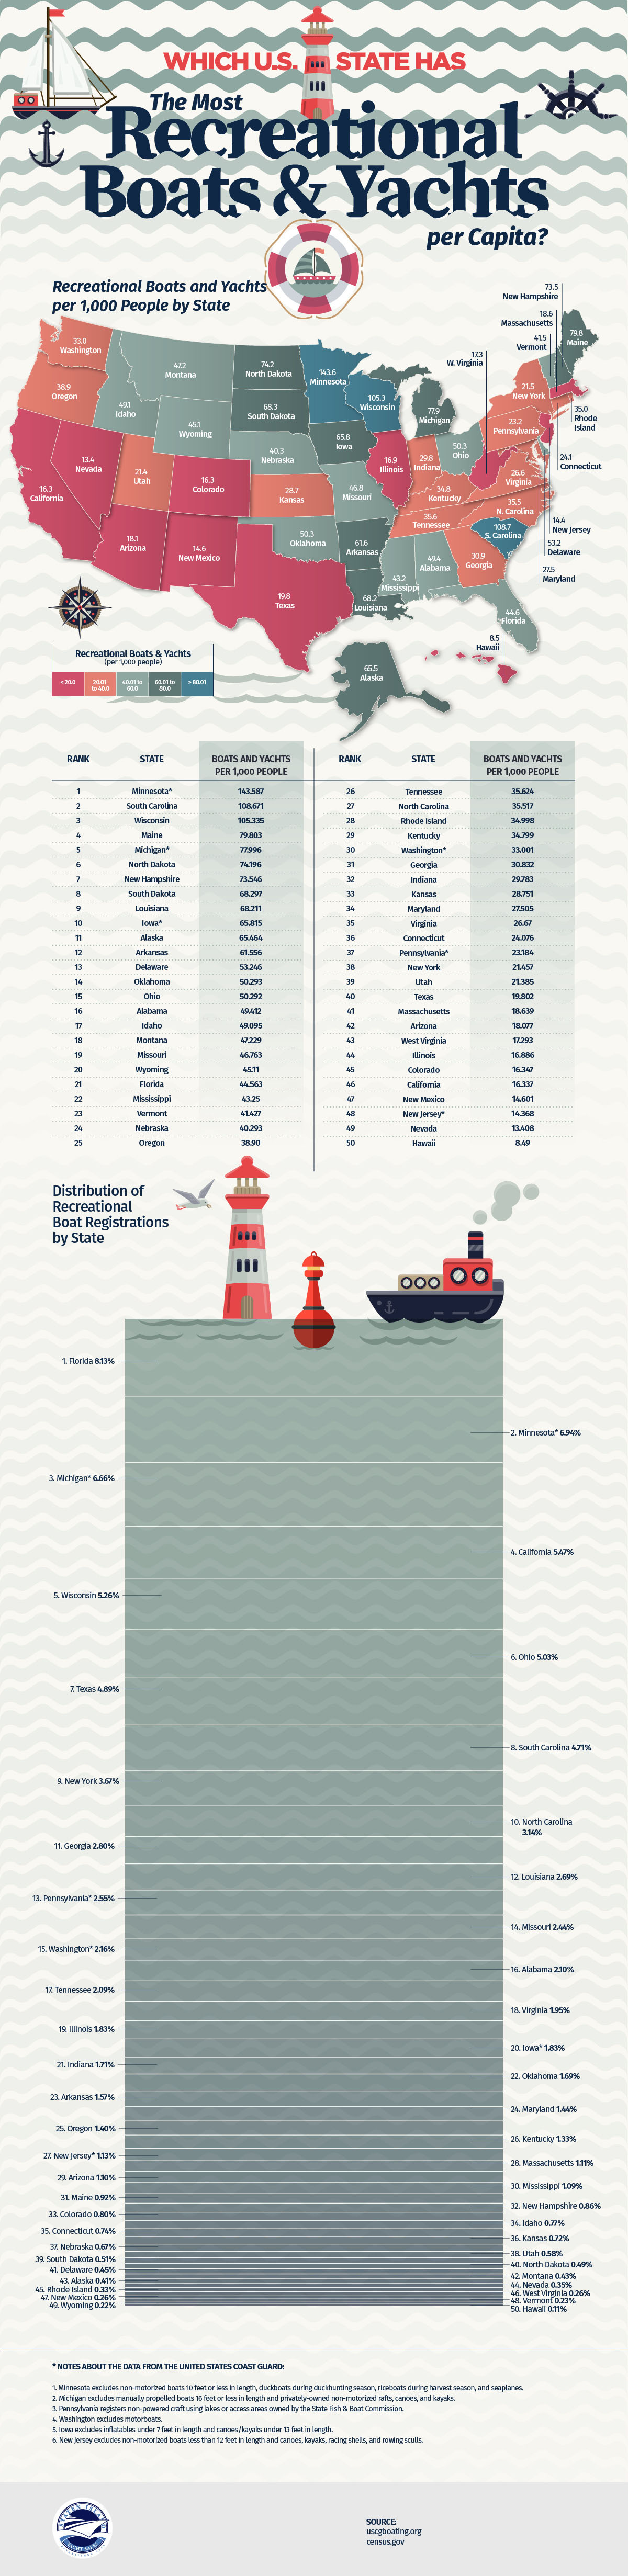 Which U.S. State Has the Most Recreational Boats & Yachts Per Capita?